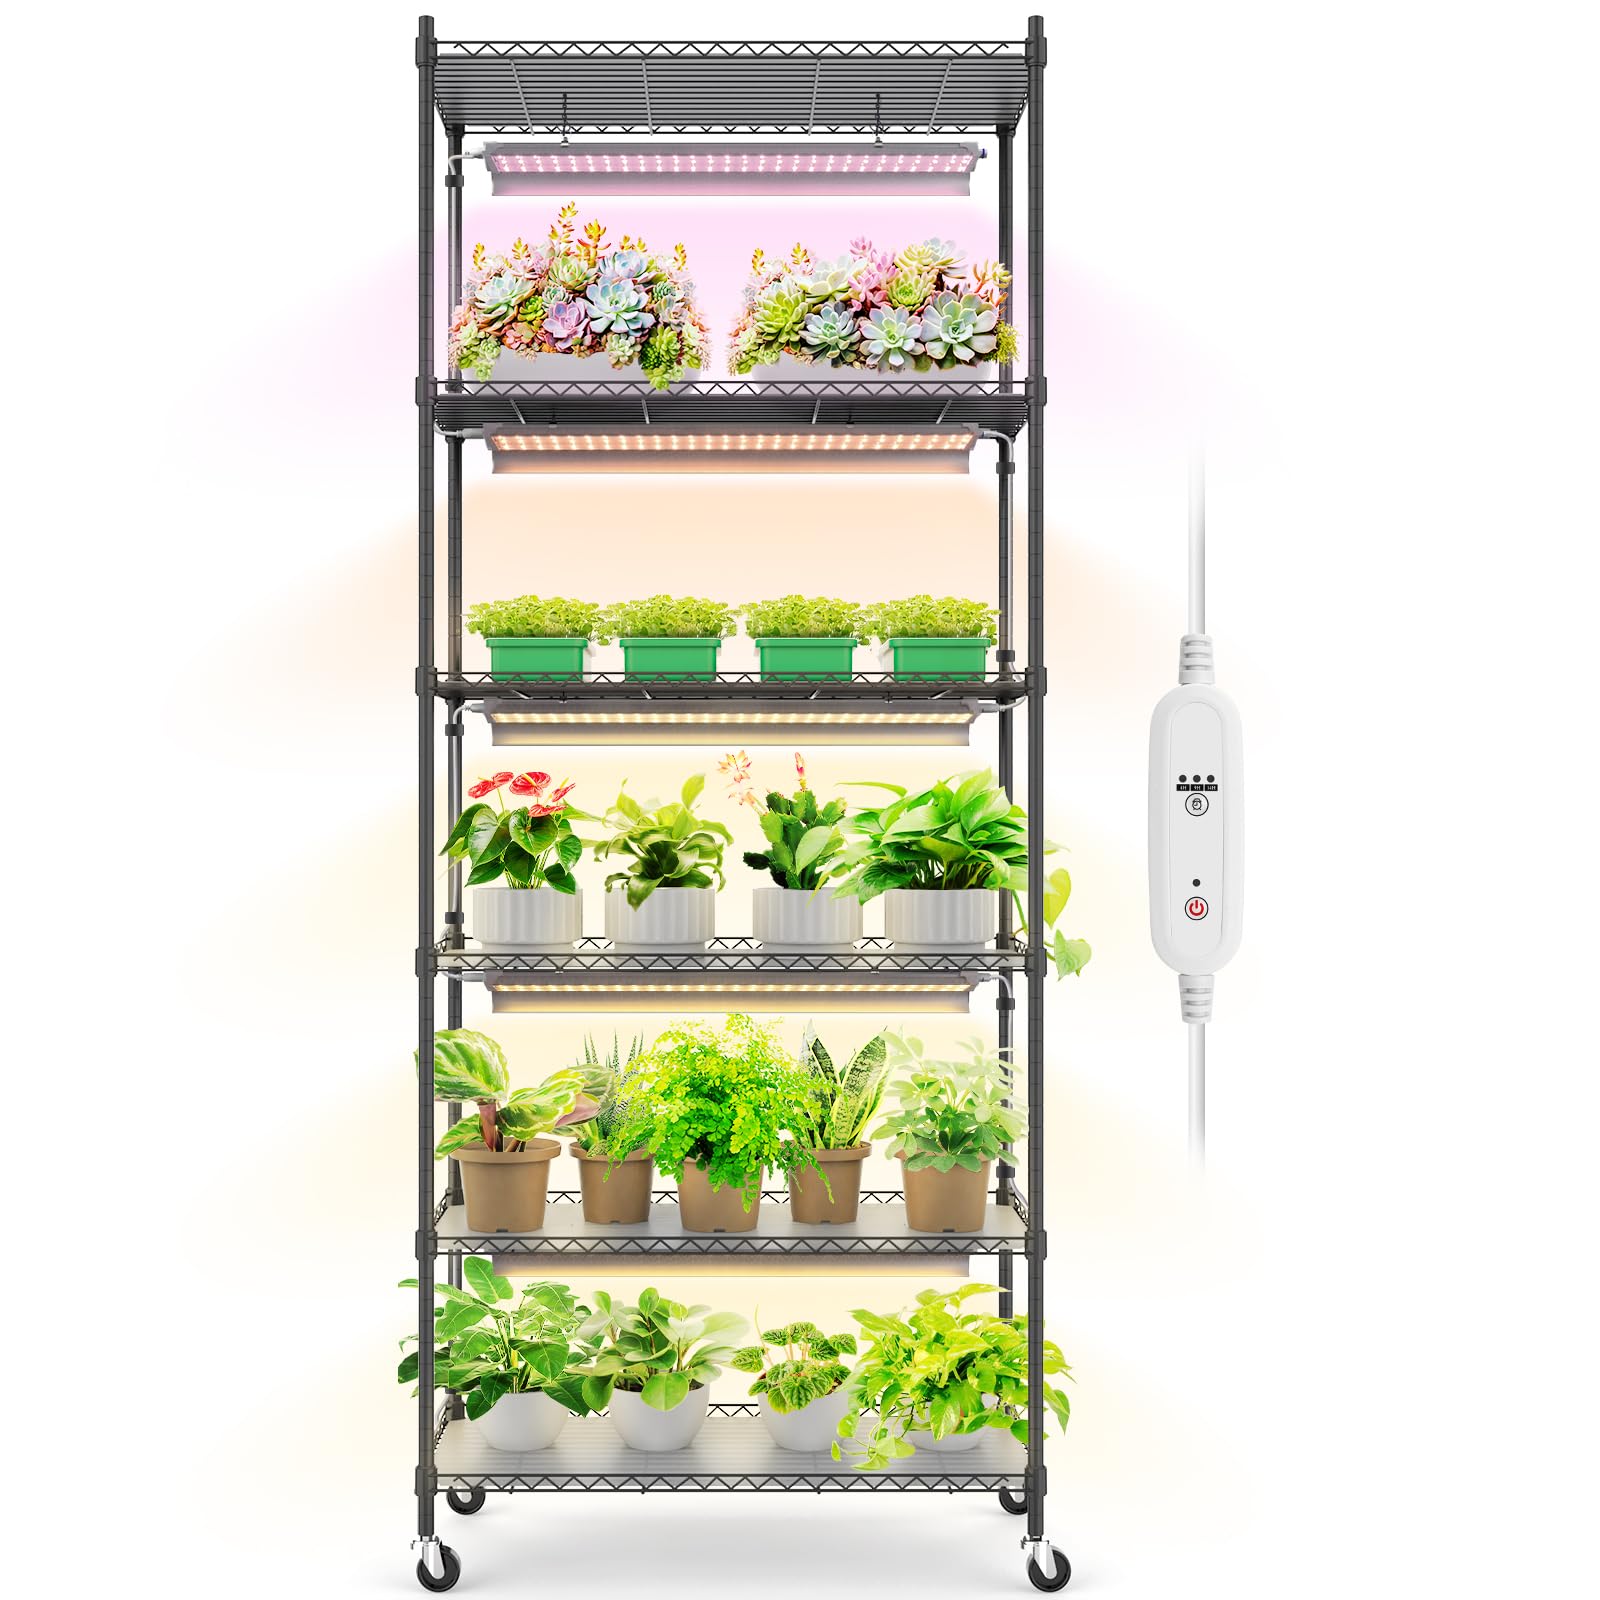 6 - Tier Plant Stand with 2020T LED Grow Lights,29.5x13.8x71IN,30W,Full Spectrum,5 lights,CJ30GCR - Barrina led